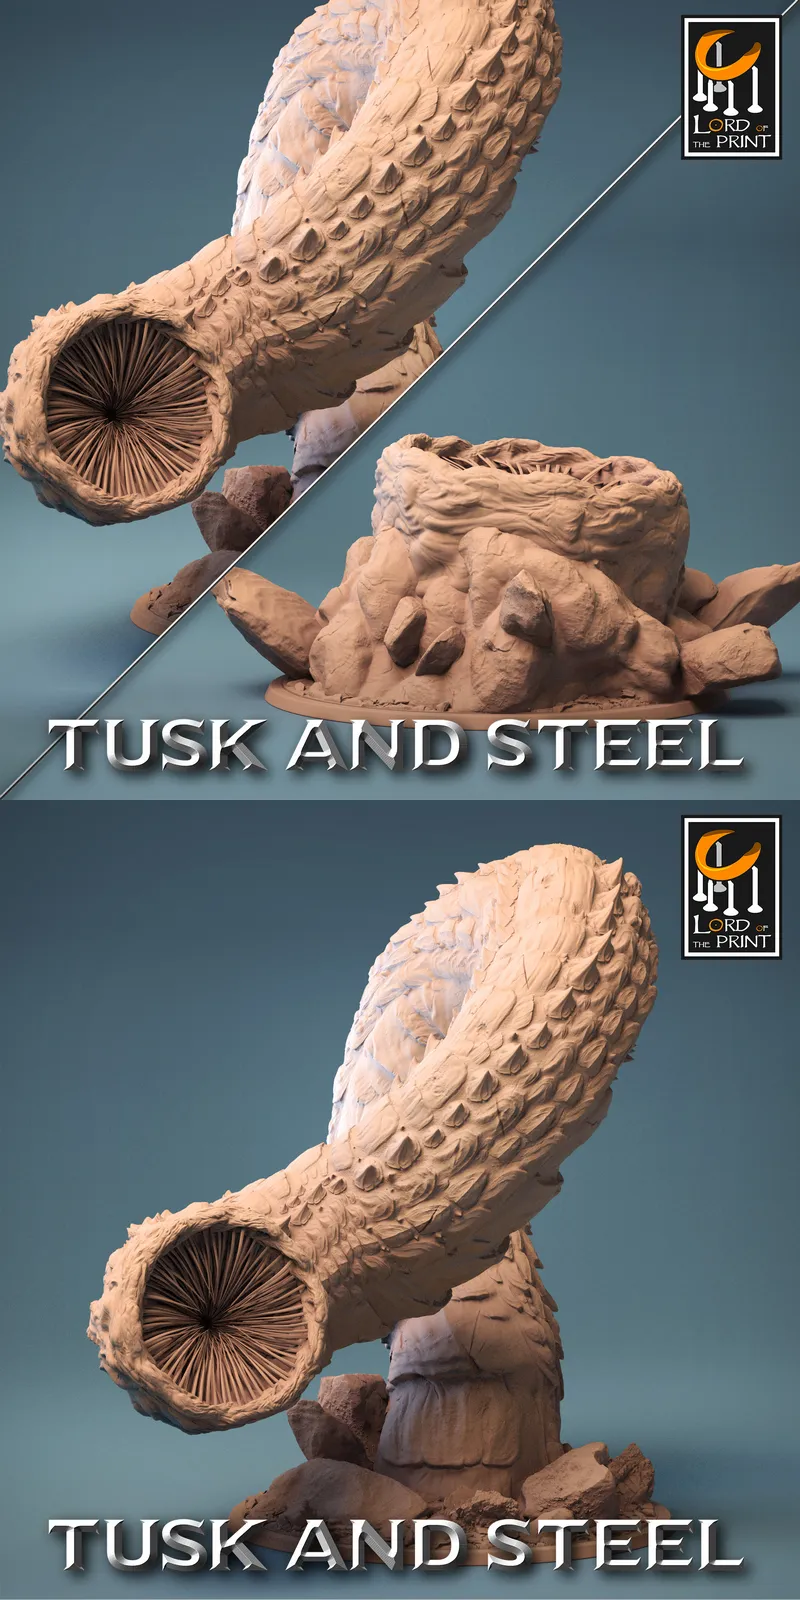 Lord of the Print - Tusk and Steel - Wurms